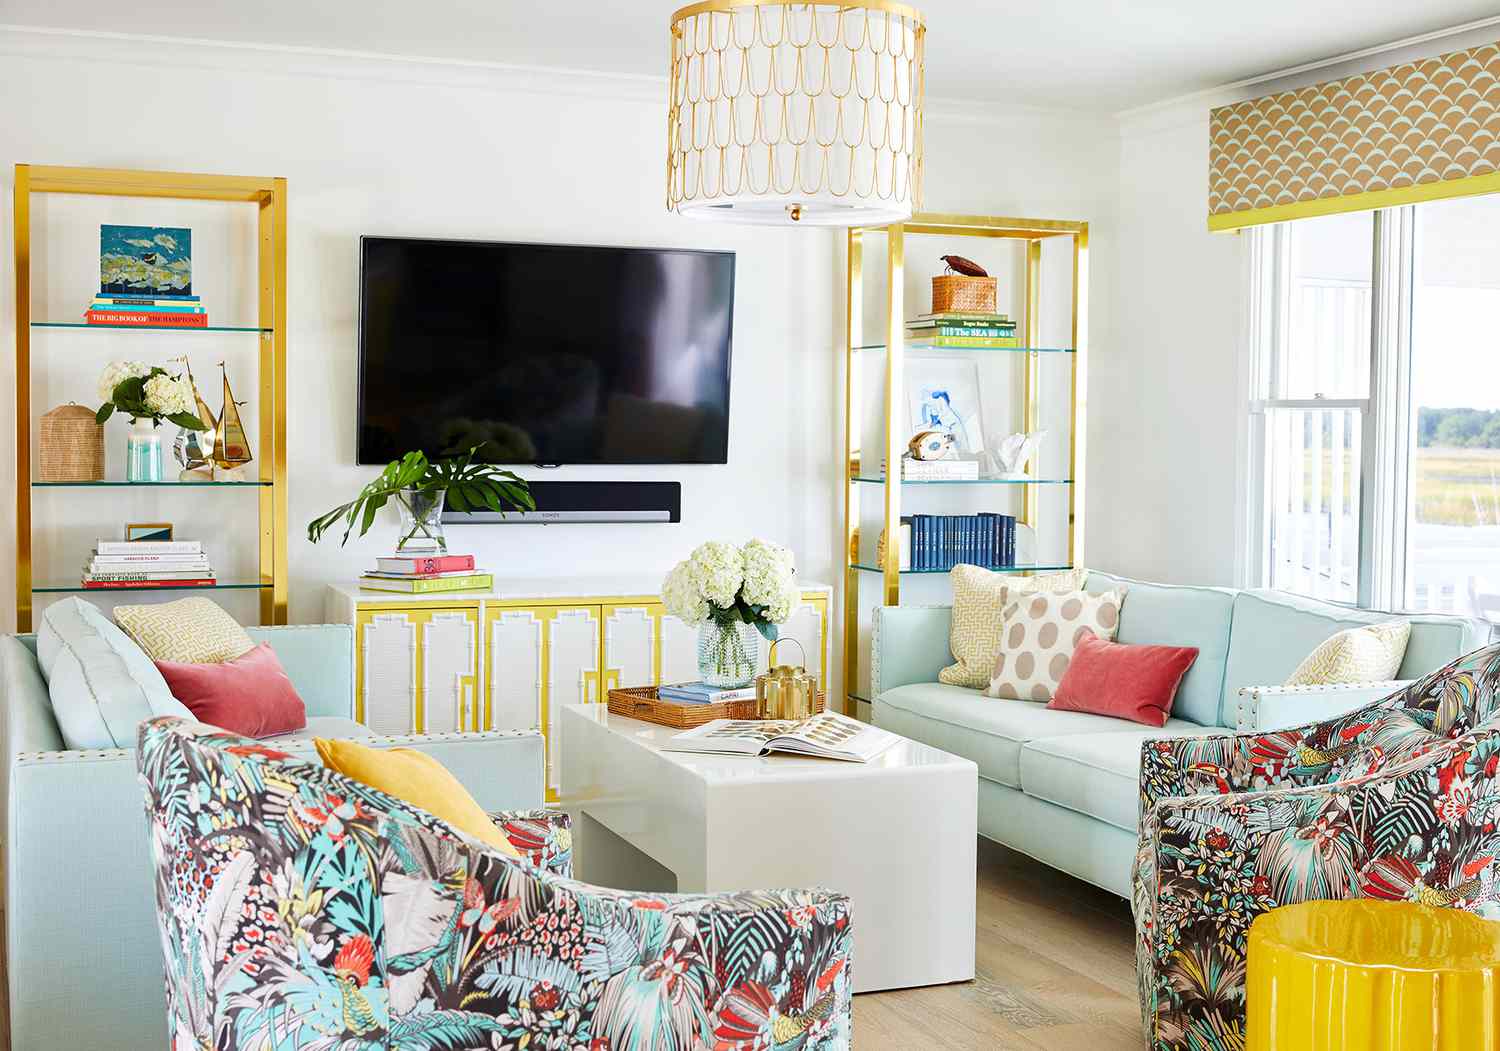 15 Stylish Ways To Decorate With A Tv Better Homes Gardens